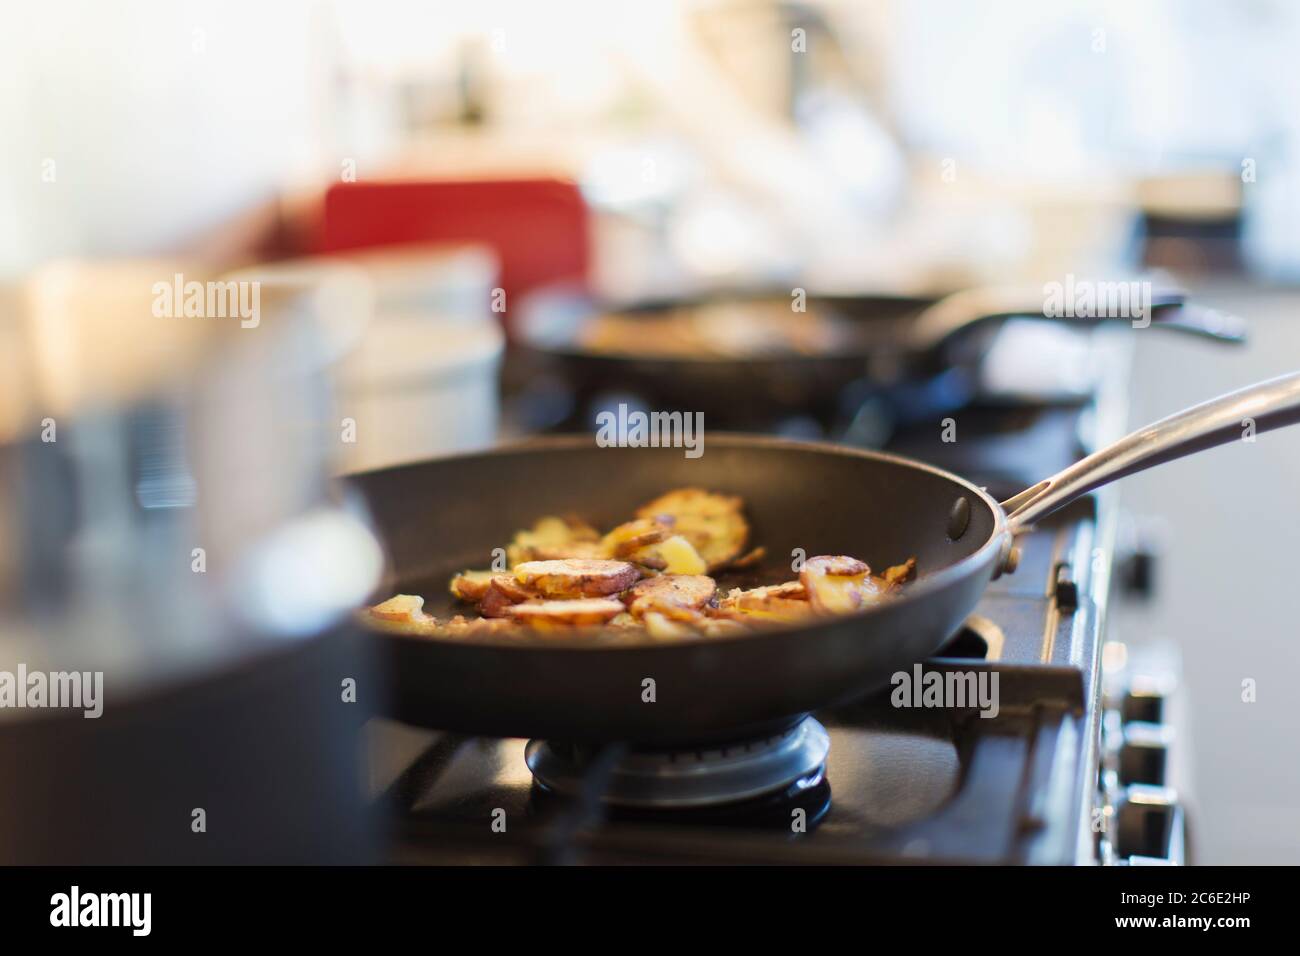 Close up food cooking in skillet on stove Stock Photo